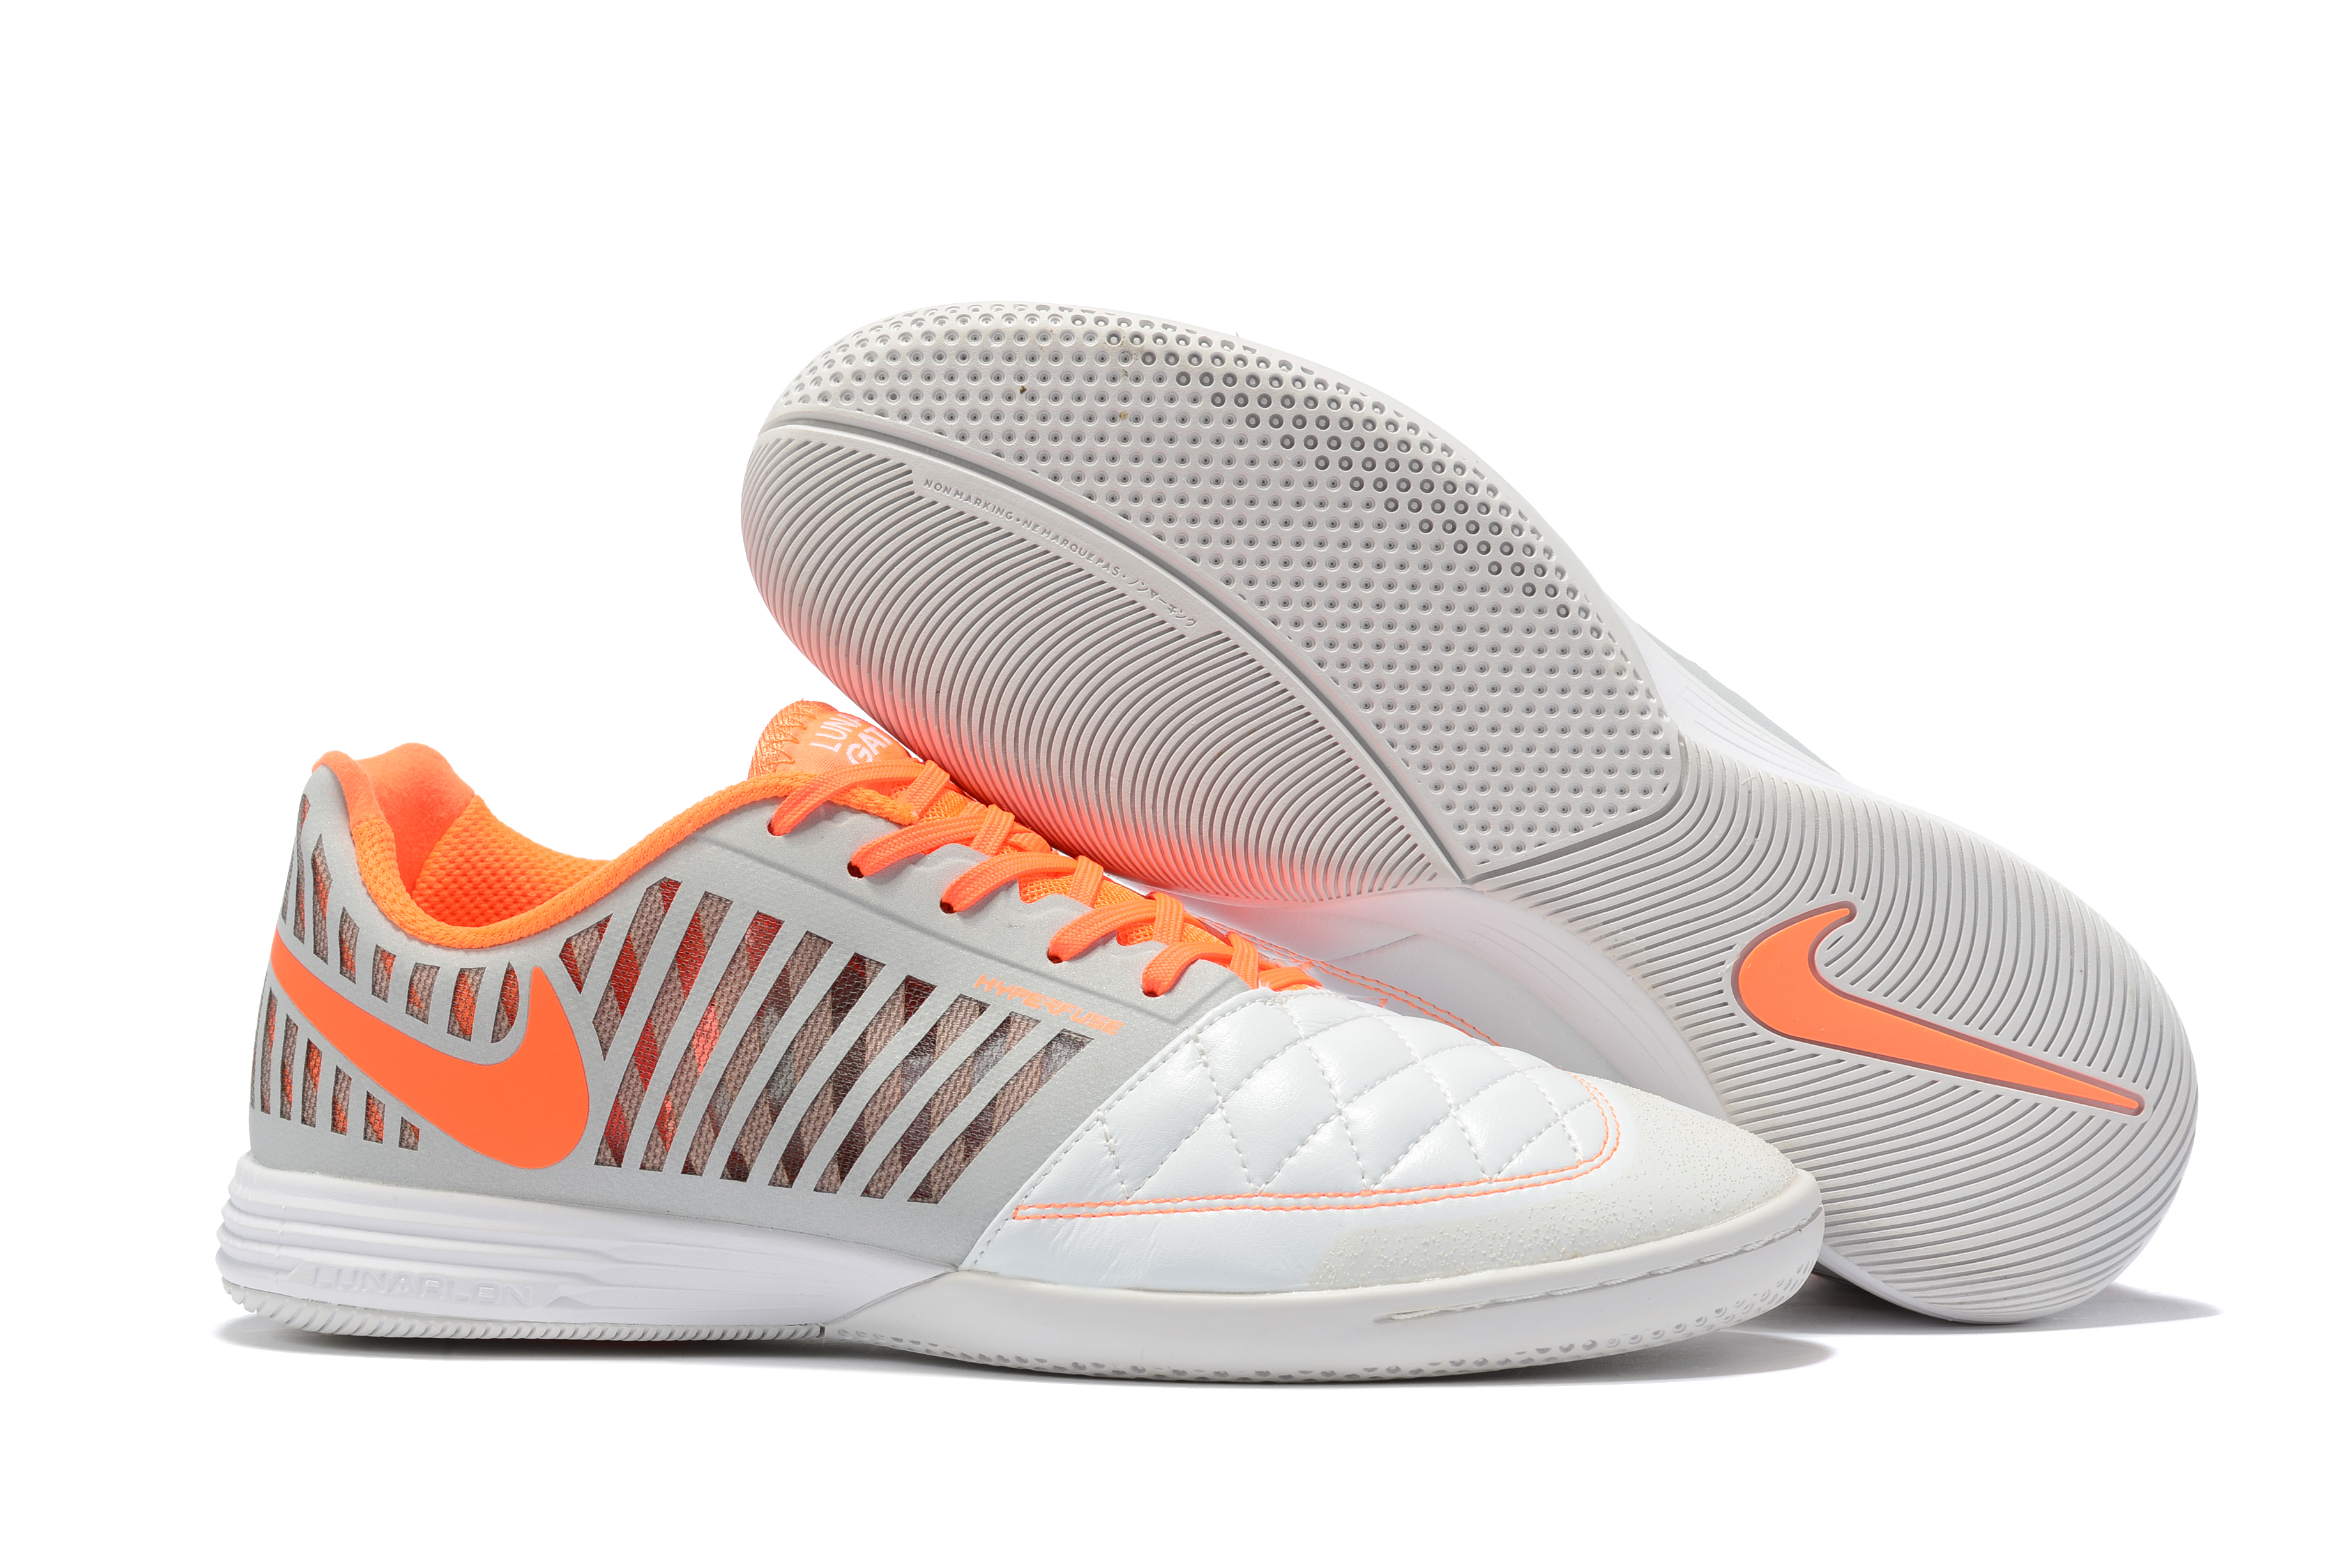 Nike Lunargato II FC247 Indoor Soccer Shoes 'Collections' 580456-180: Top-Notch Performance for Indoor Soccer